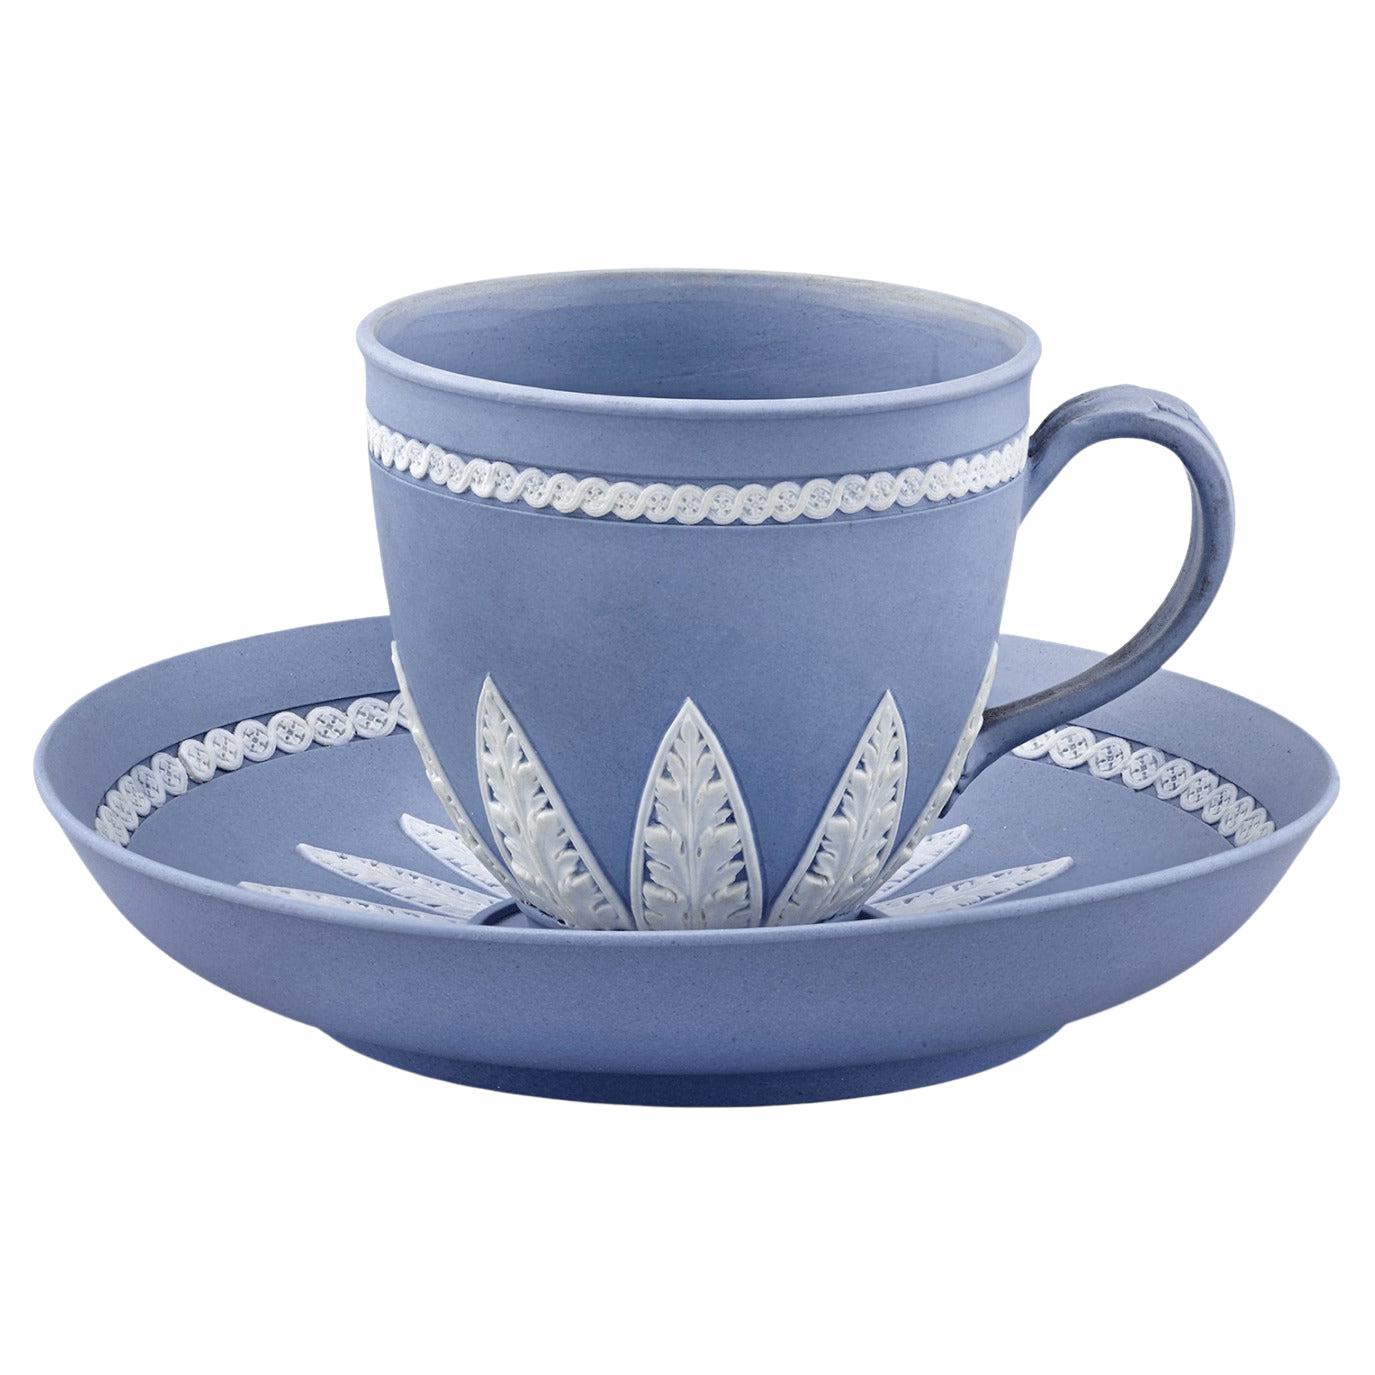 Wedgwood Pale Blue Jasperware Coffee Cup and Saucer